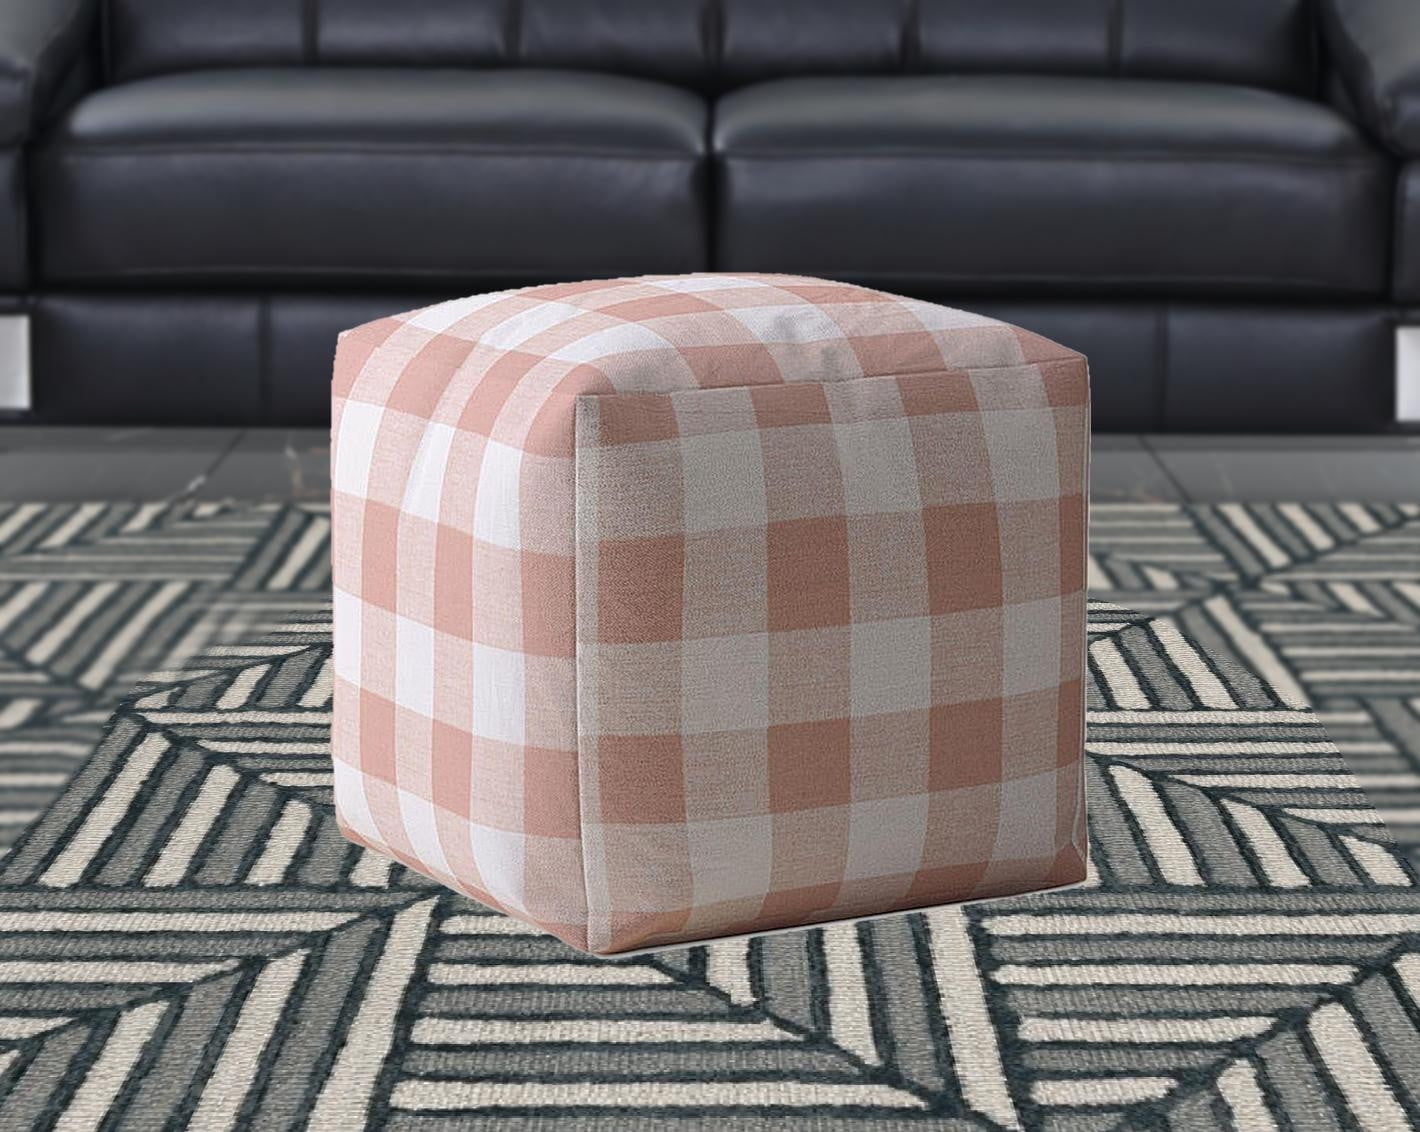 HomeRoots 518221 17 x 17 x 17 in. Pink & White Cotton Gingham Pouf Ottoman